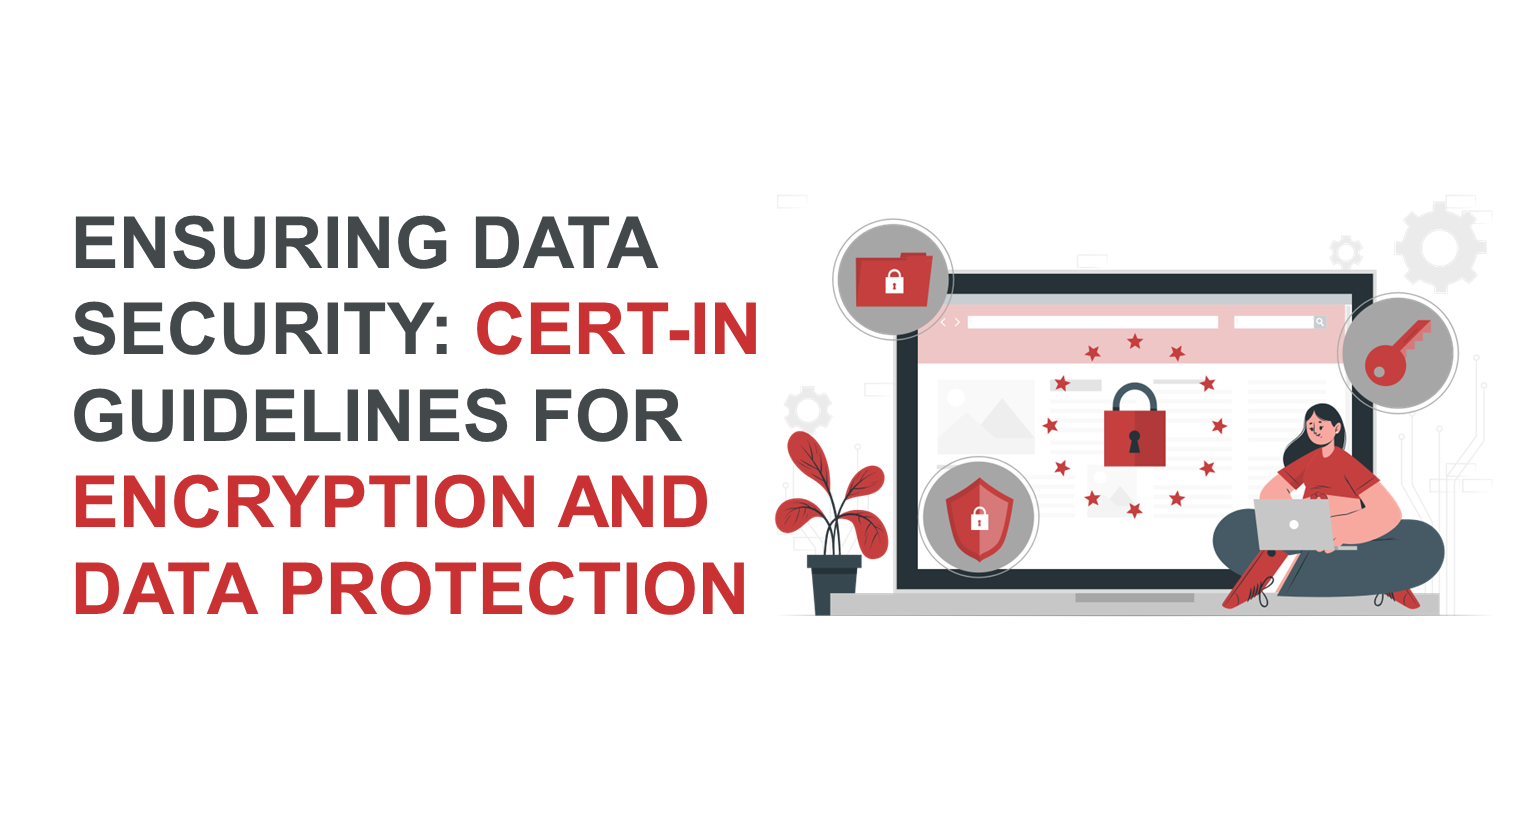 Ensuring Data Security: Cert-in Guidelines for Encryption and Data Protection